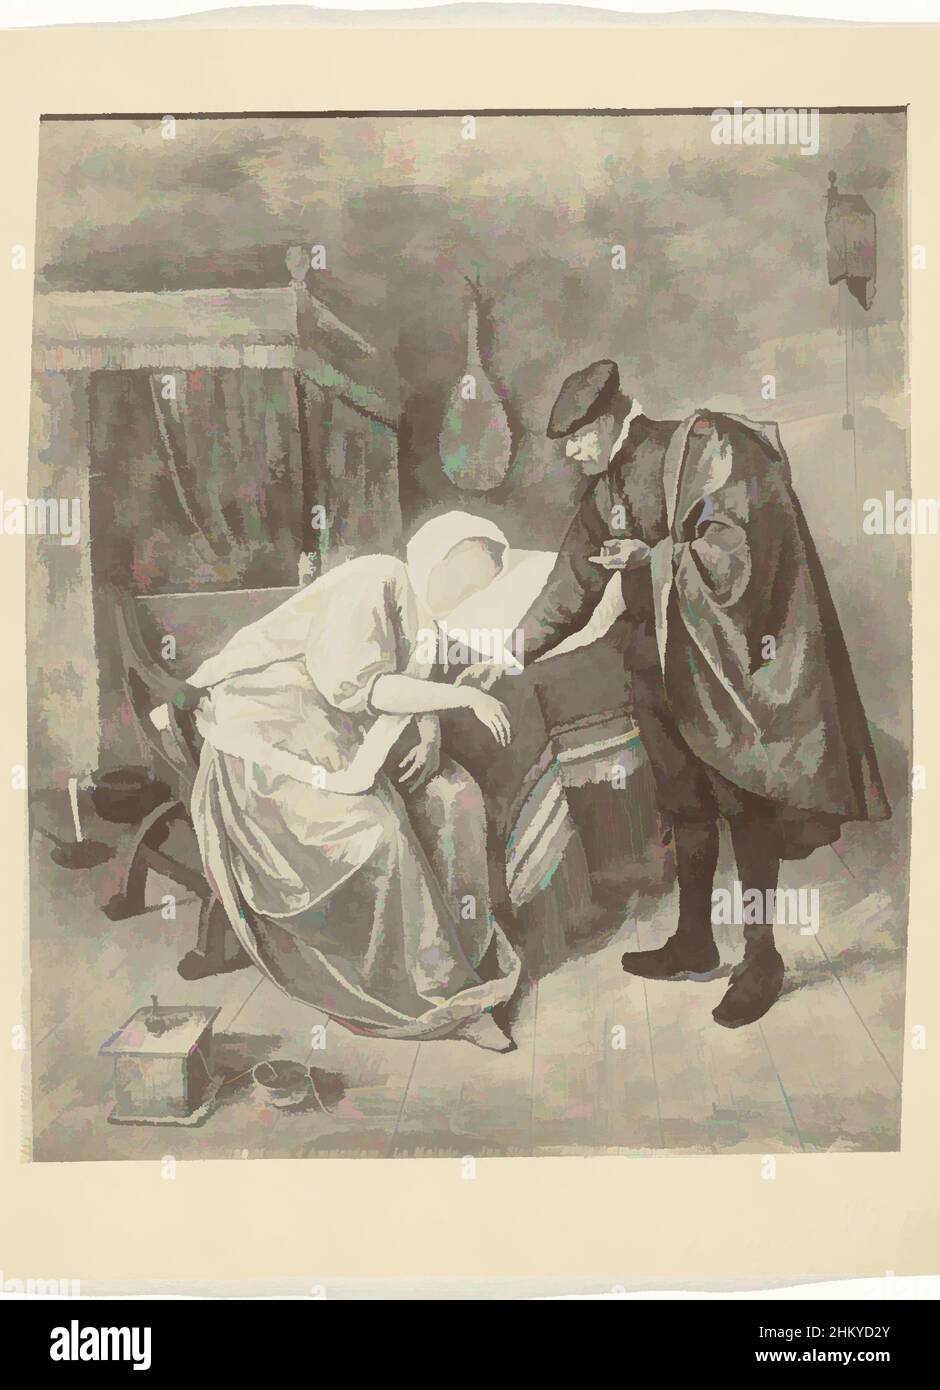 Art inspired by Photoreproduction of the painting The Sick Woman by Jan Steen, Musée d'Amsterdam. La Malade. - Jan van Steen. - Ecole hollandaise, after: Jan Havicksz. Steen, Amsterdam, publisher: Paris, 1867 - 1880, paper, cardboard, albumen print, height 265 mm × width 223 mmheight, Classic works modernized by Artotop with a splash of modernity. Shapes, color and value, eye-catching visual impact on art. Emotions through freedom of artworks in a contemporary way. A timeless message pursuing a wildly creative new direction. Artists turning to the digital medium and creating the Artotop NFT Stock Photo